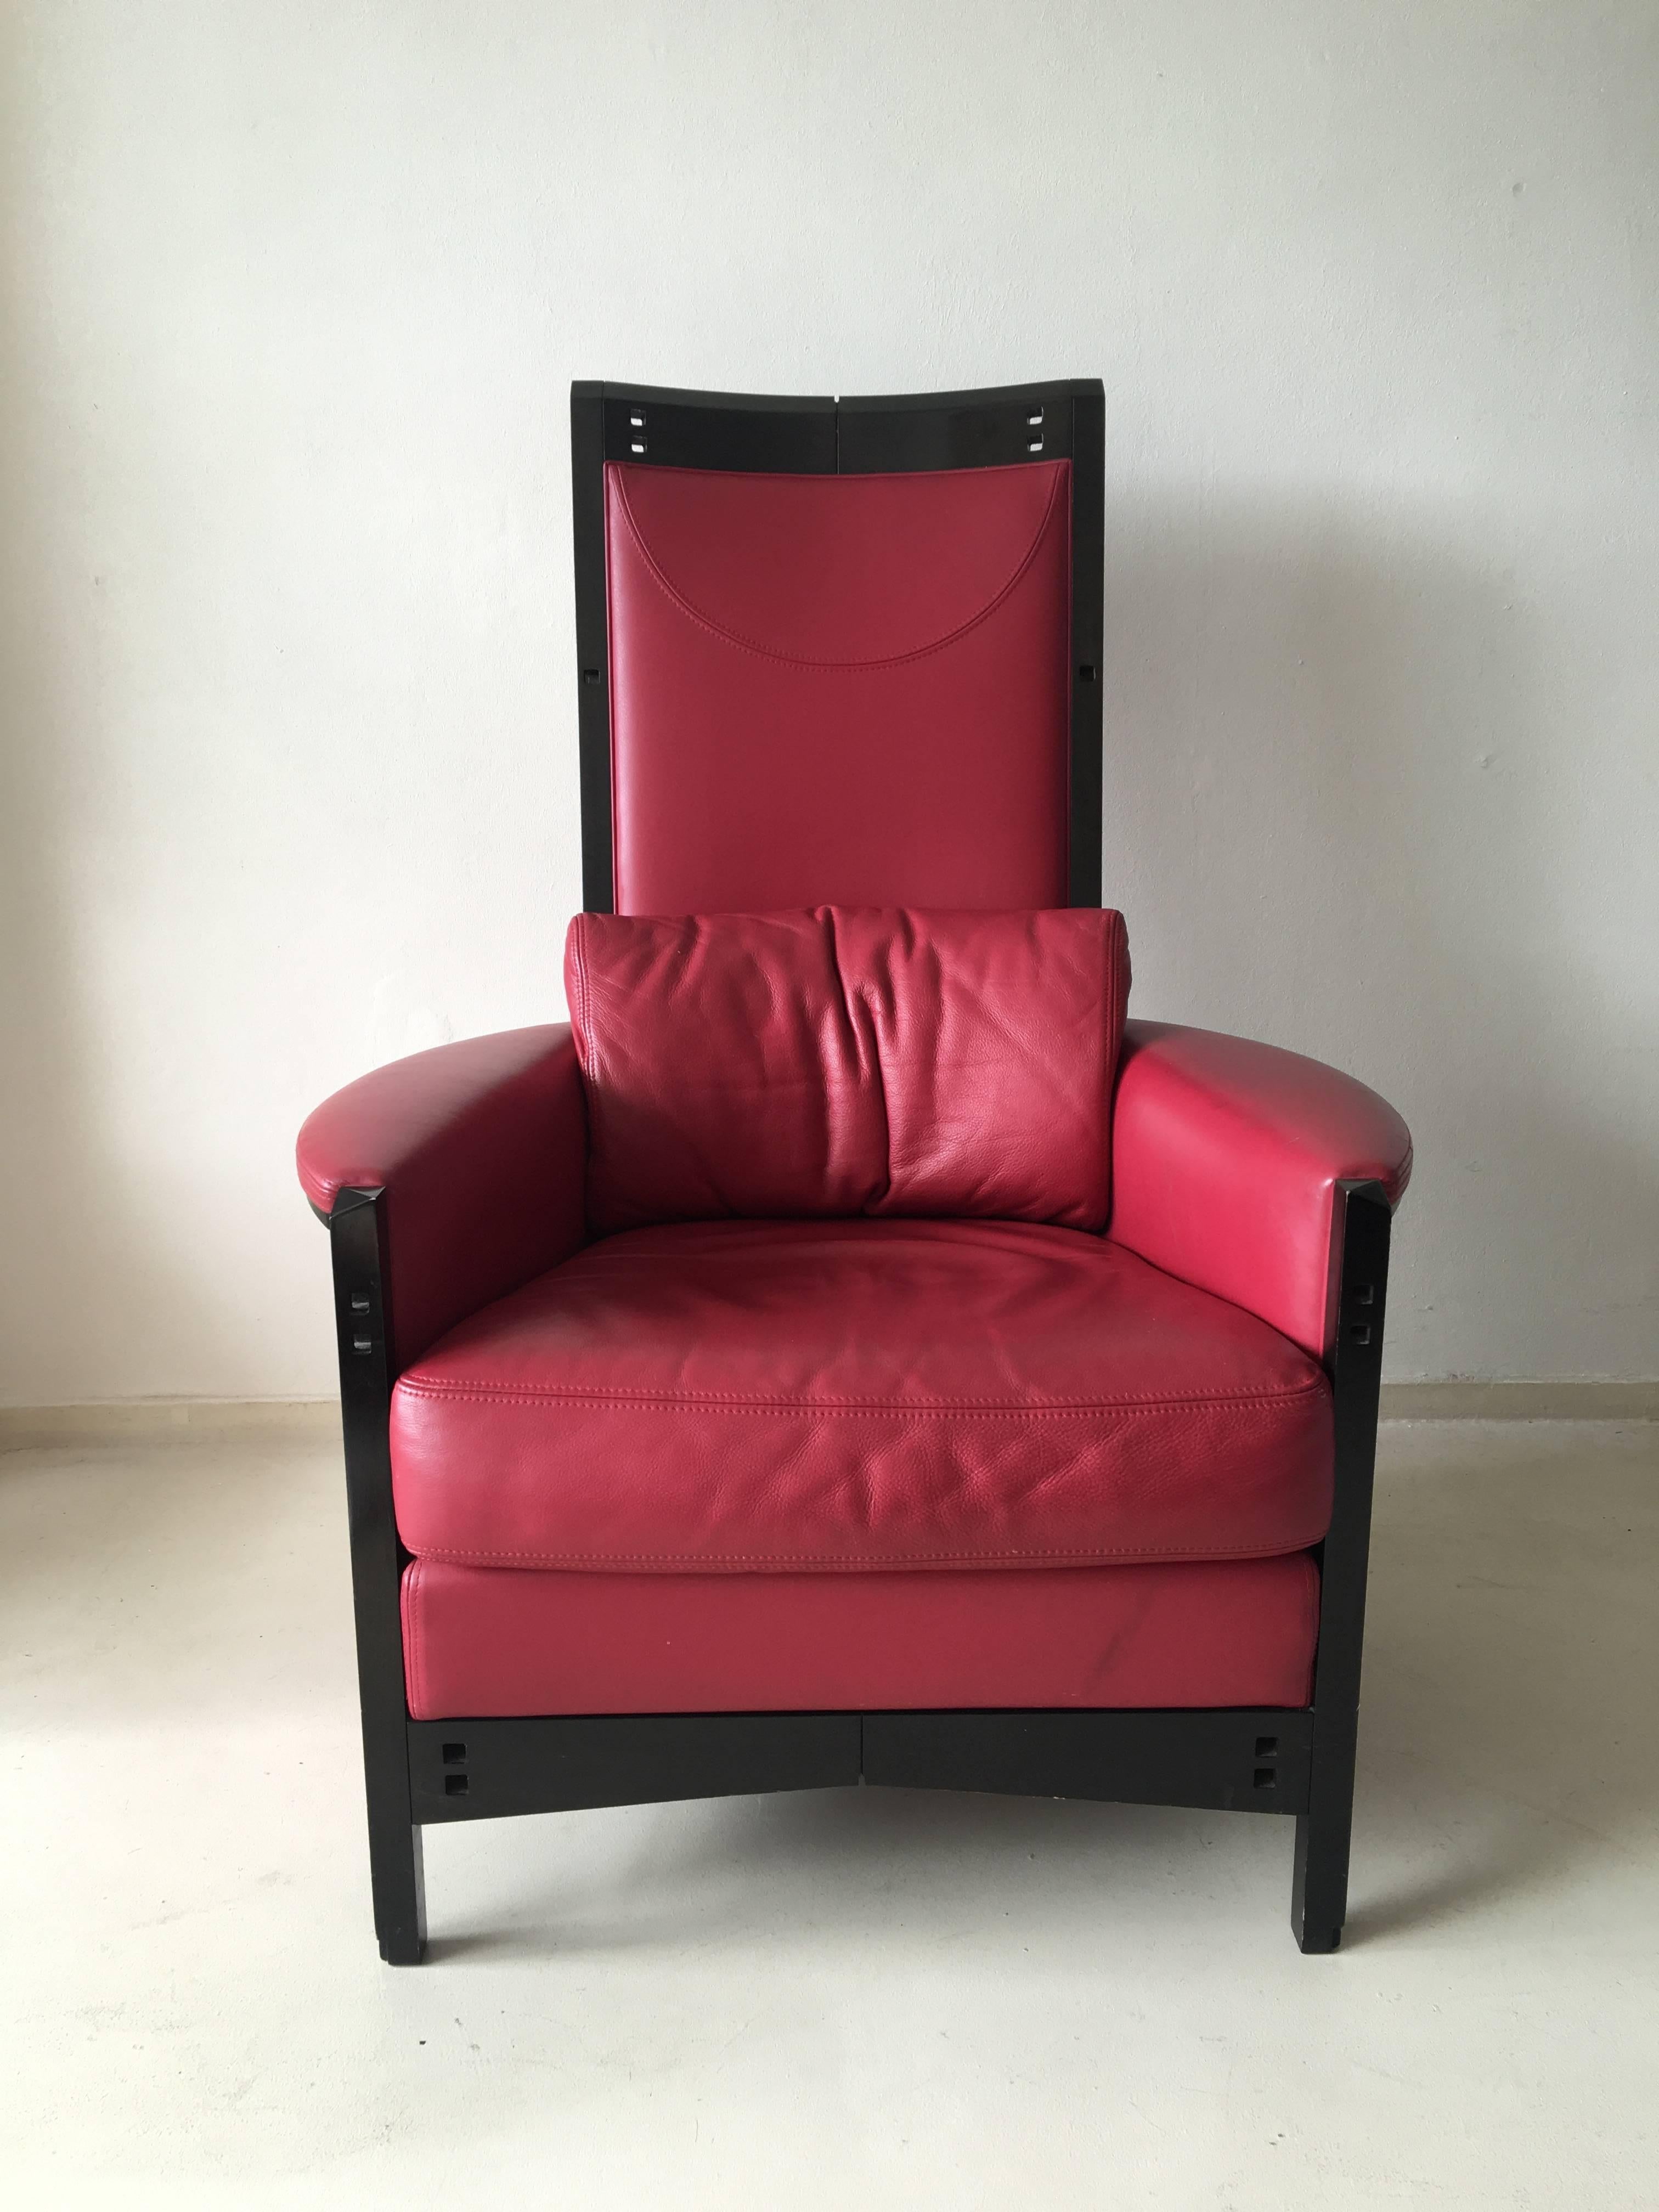 This rare high back chair was designed by Umberto Asnago in Italy, circa 1990s.
It features a black lacquered wooden frame and a red leather upholstery. It comes with a lumbar cushion and remains in a good vintage condition with minimal signs of